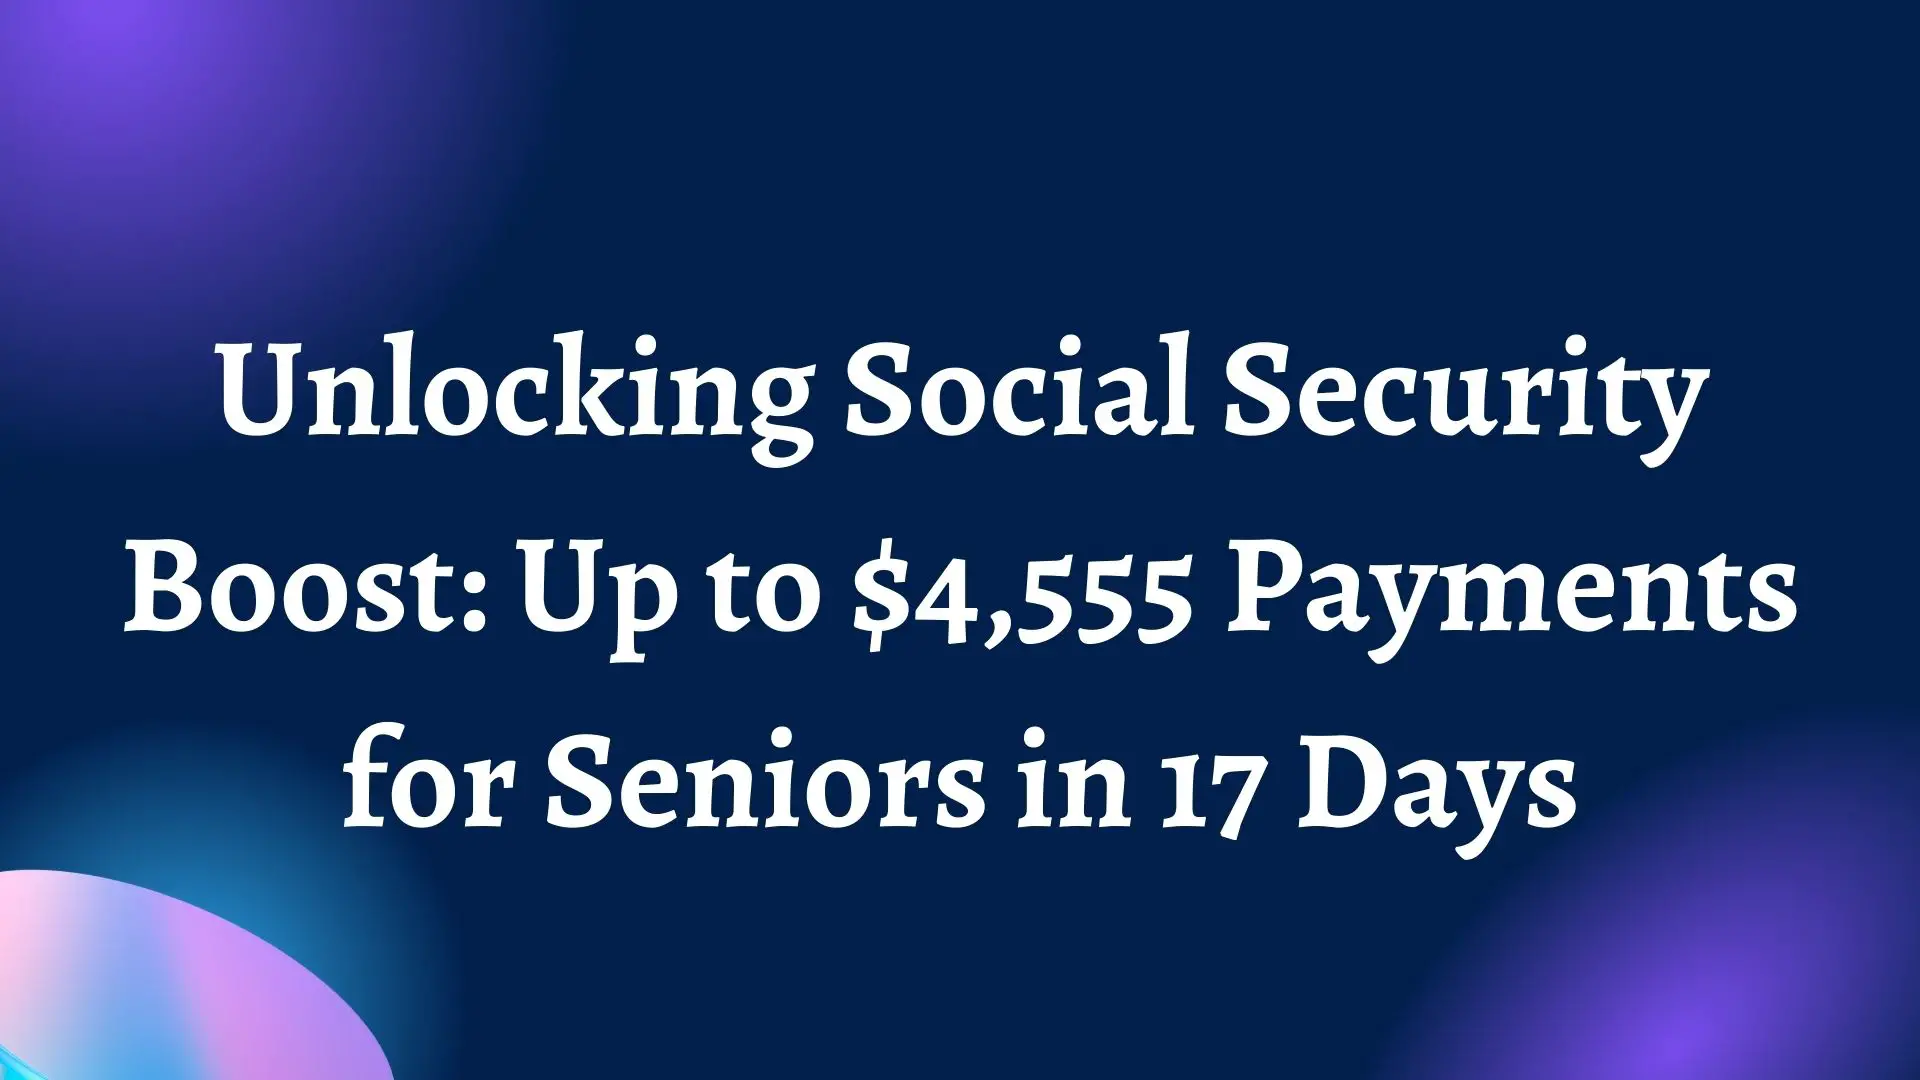 Unlocking Social Security Boost: Up to $4,555 Payments for Seniors in 17 Days